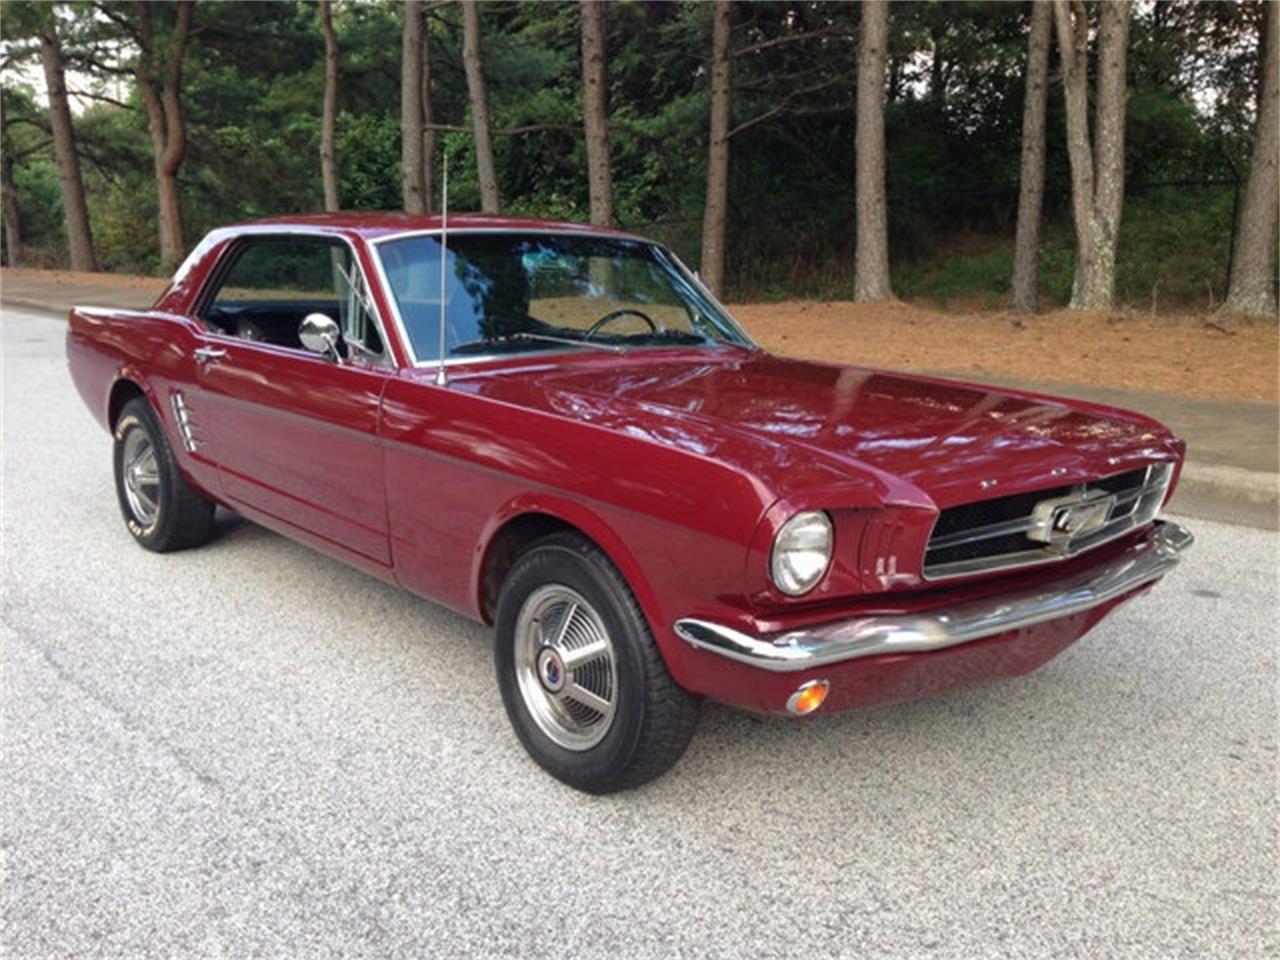 1965 Ford Mustang for Sale | ClassicCars.com | CC-1057510